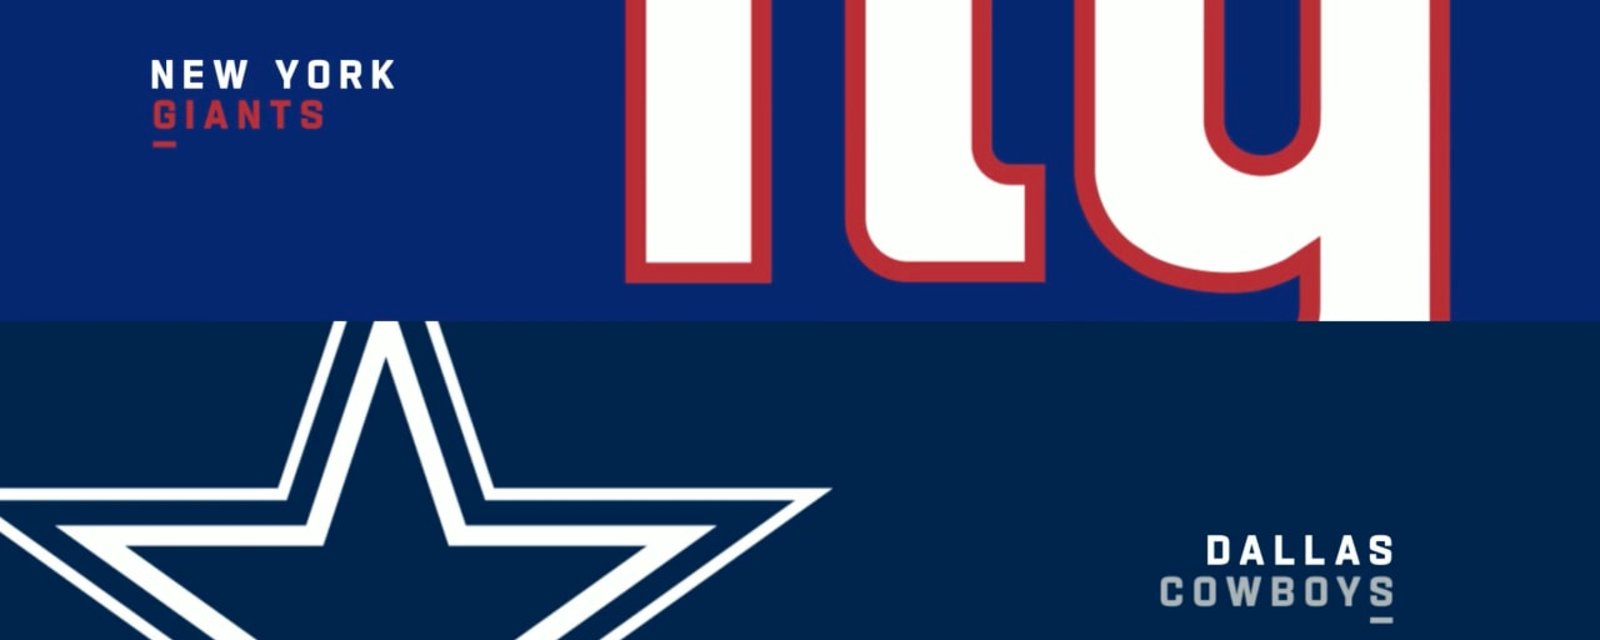 Giants deny major request from Cowboys 